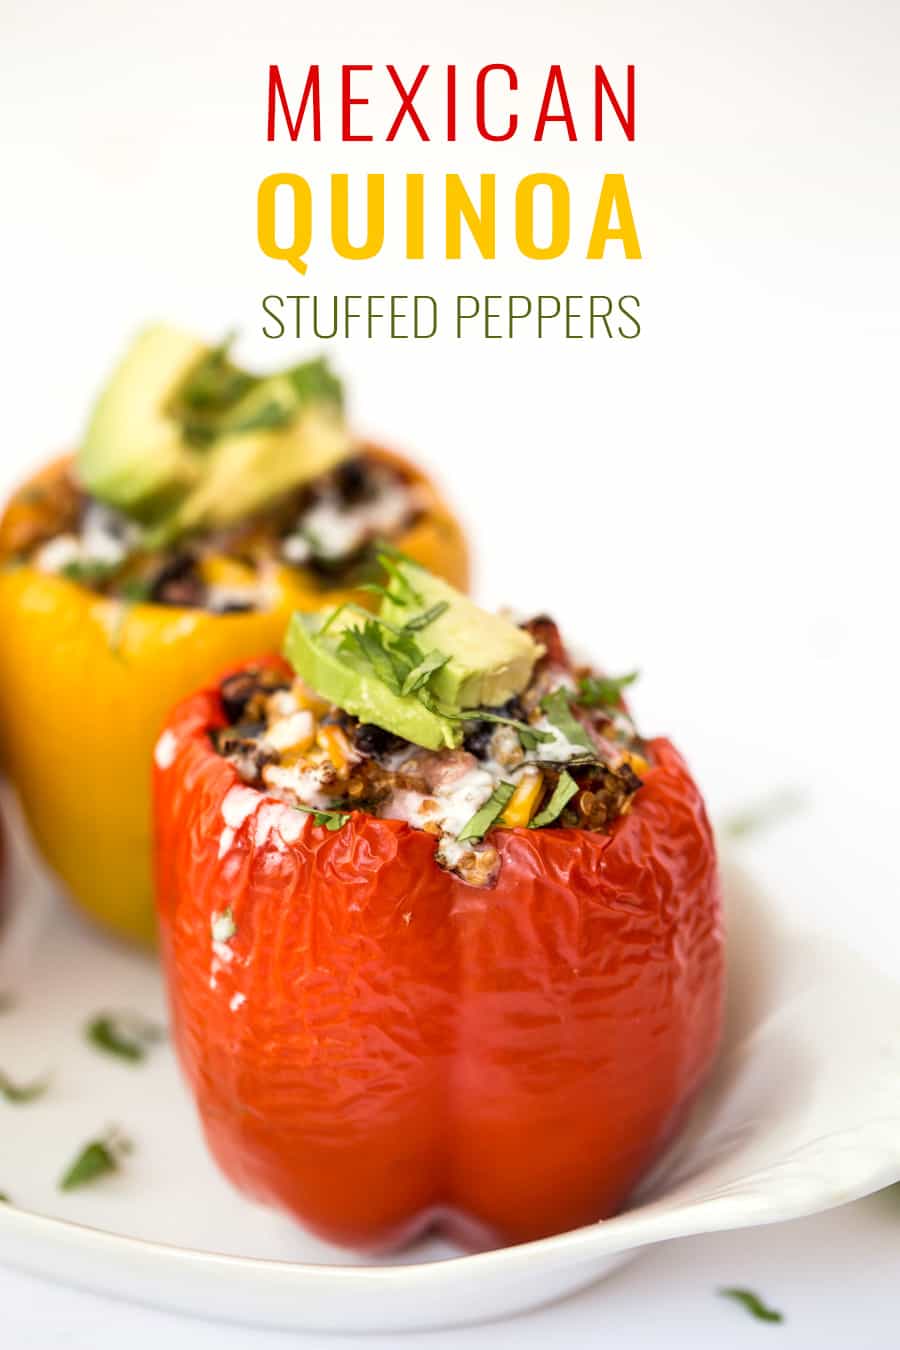 These delectable MEXICAN QUINOA STUFFED PEPPERS are a hearty, plant-based entree that is easy to make, packed with flavor and doubles as a great meal-prep option as well!